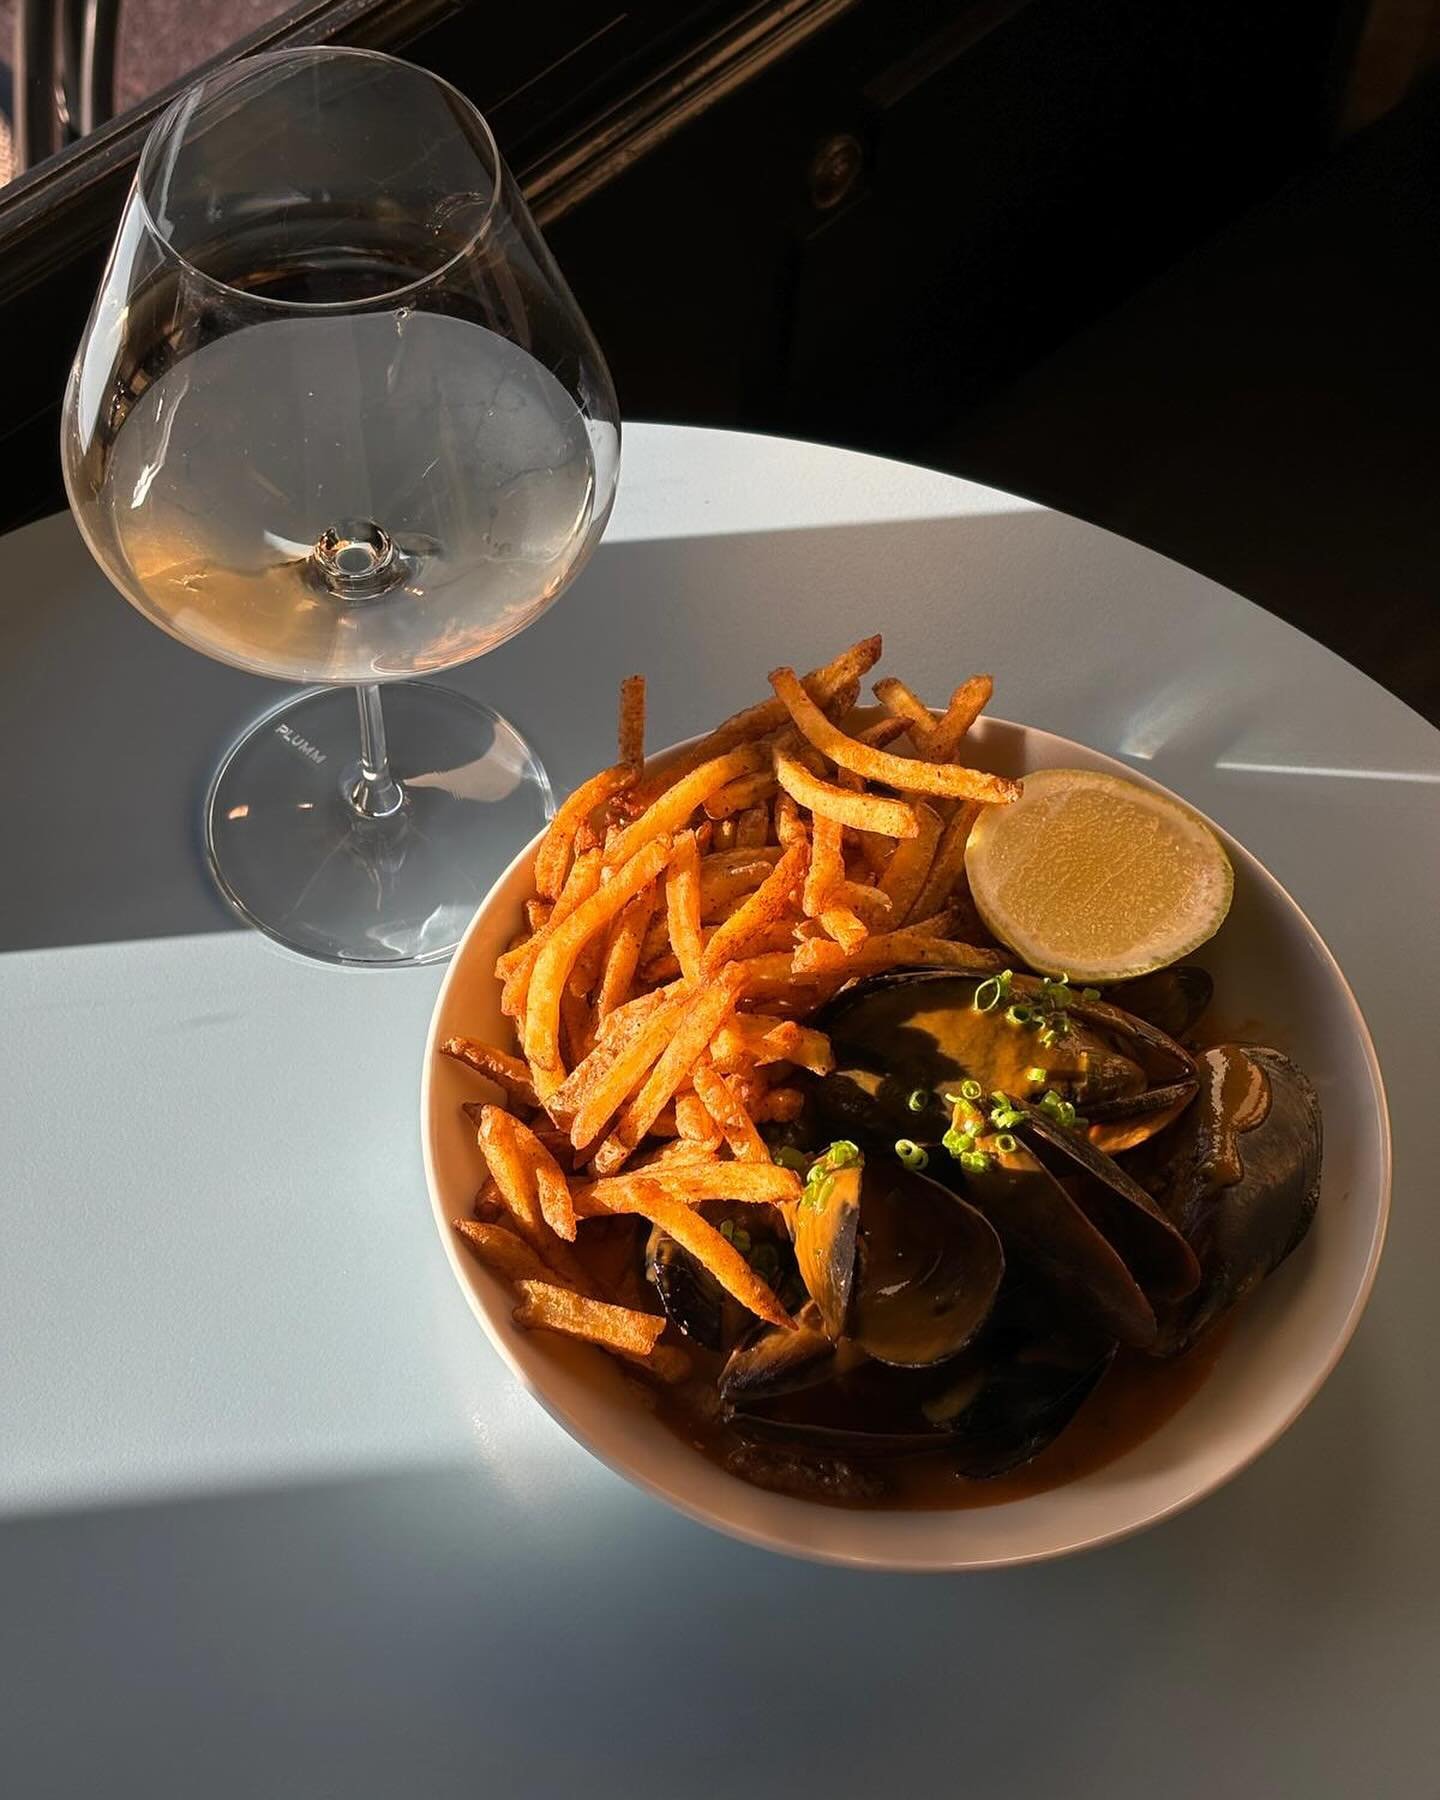 Lunch special this Friday and Saturday!! Moules, Sauce Champagne, and Frites. Add Le Salad and lunch is sorted.

Available for lunch only. Book your spot. Walk-ins welcome.